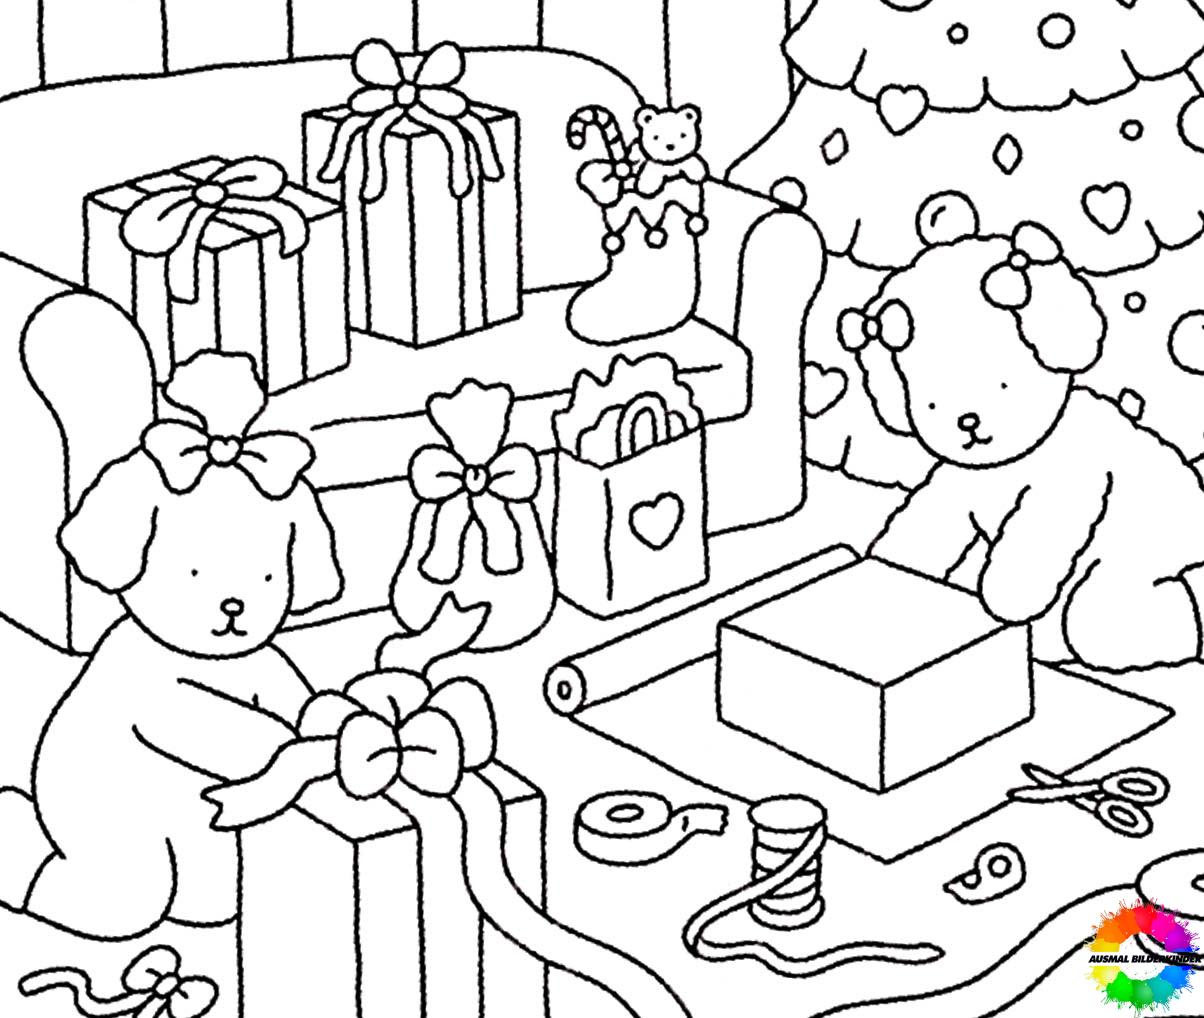 Bobbie Goods Coloring Pages  Coloring pages, Coloring book art, Detailed  coloring pages